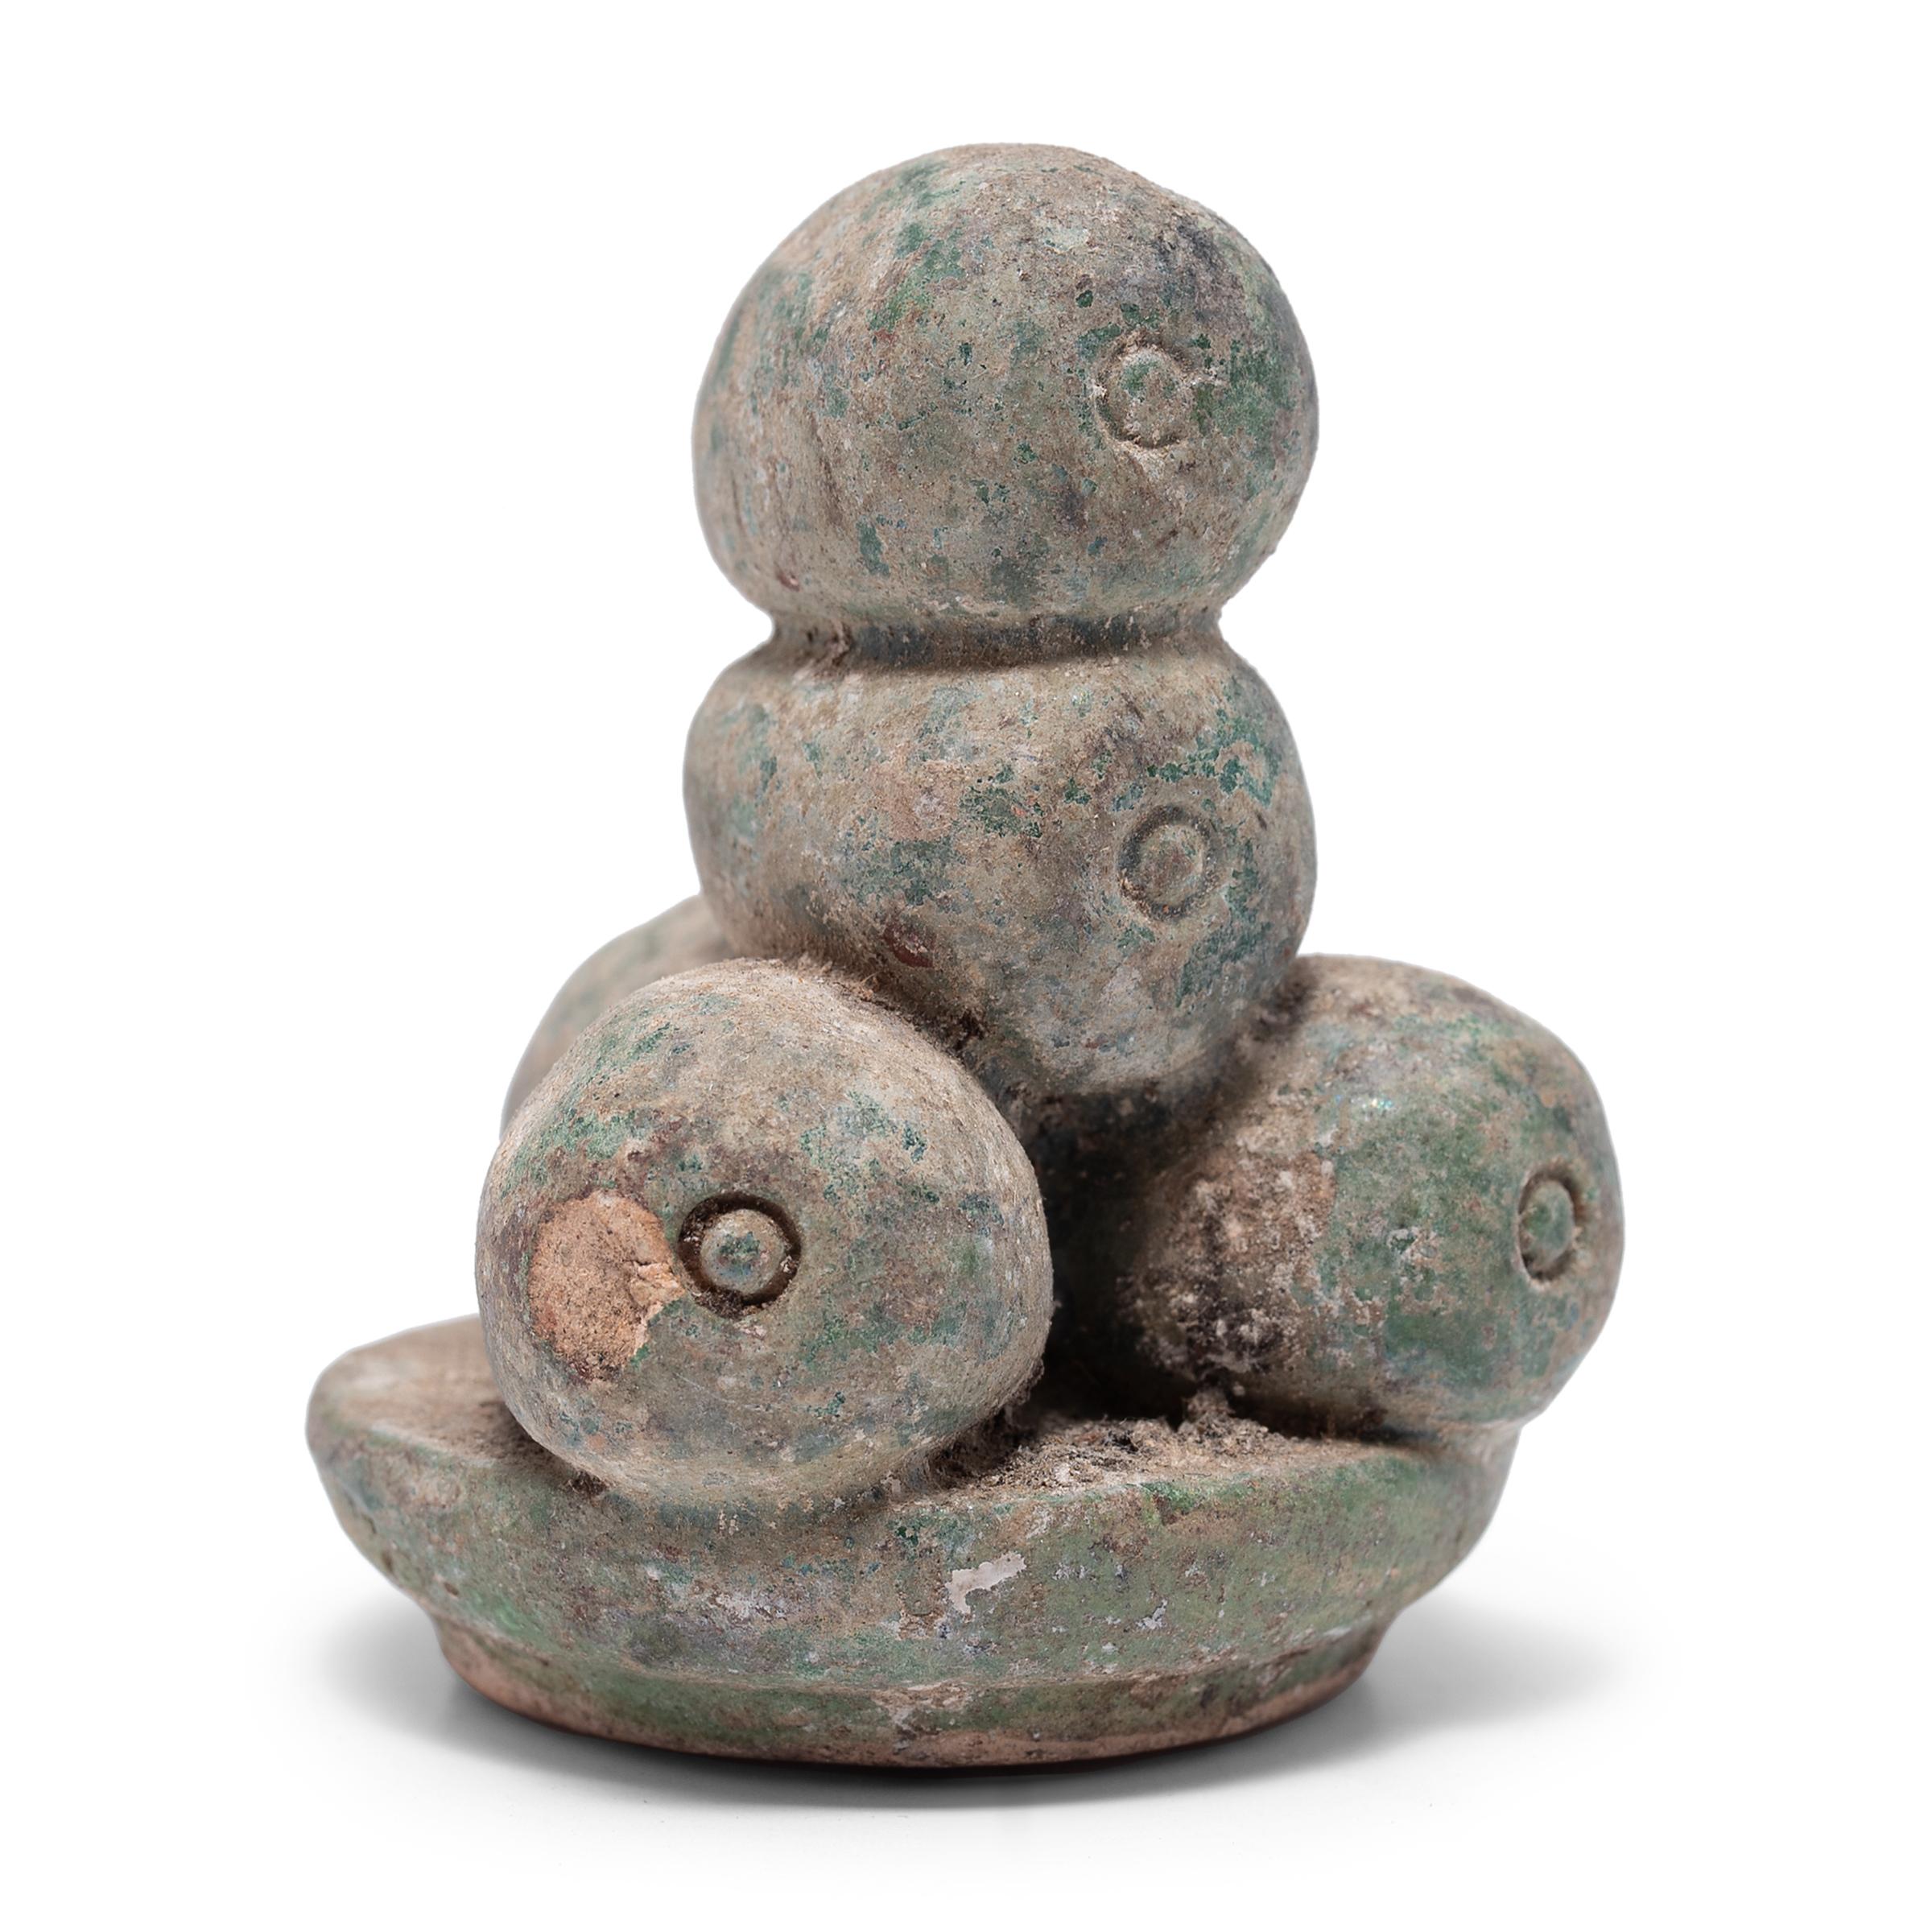 These petite ceramic sculptures are a type of centuries-old burial figurine known as míngqì or 